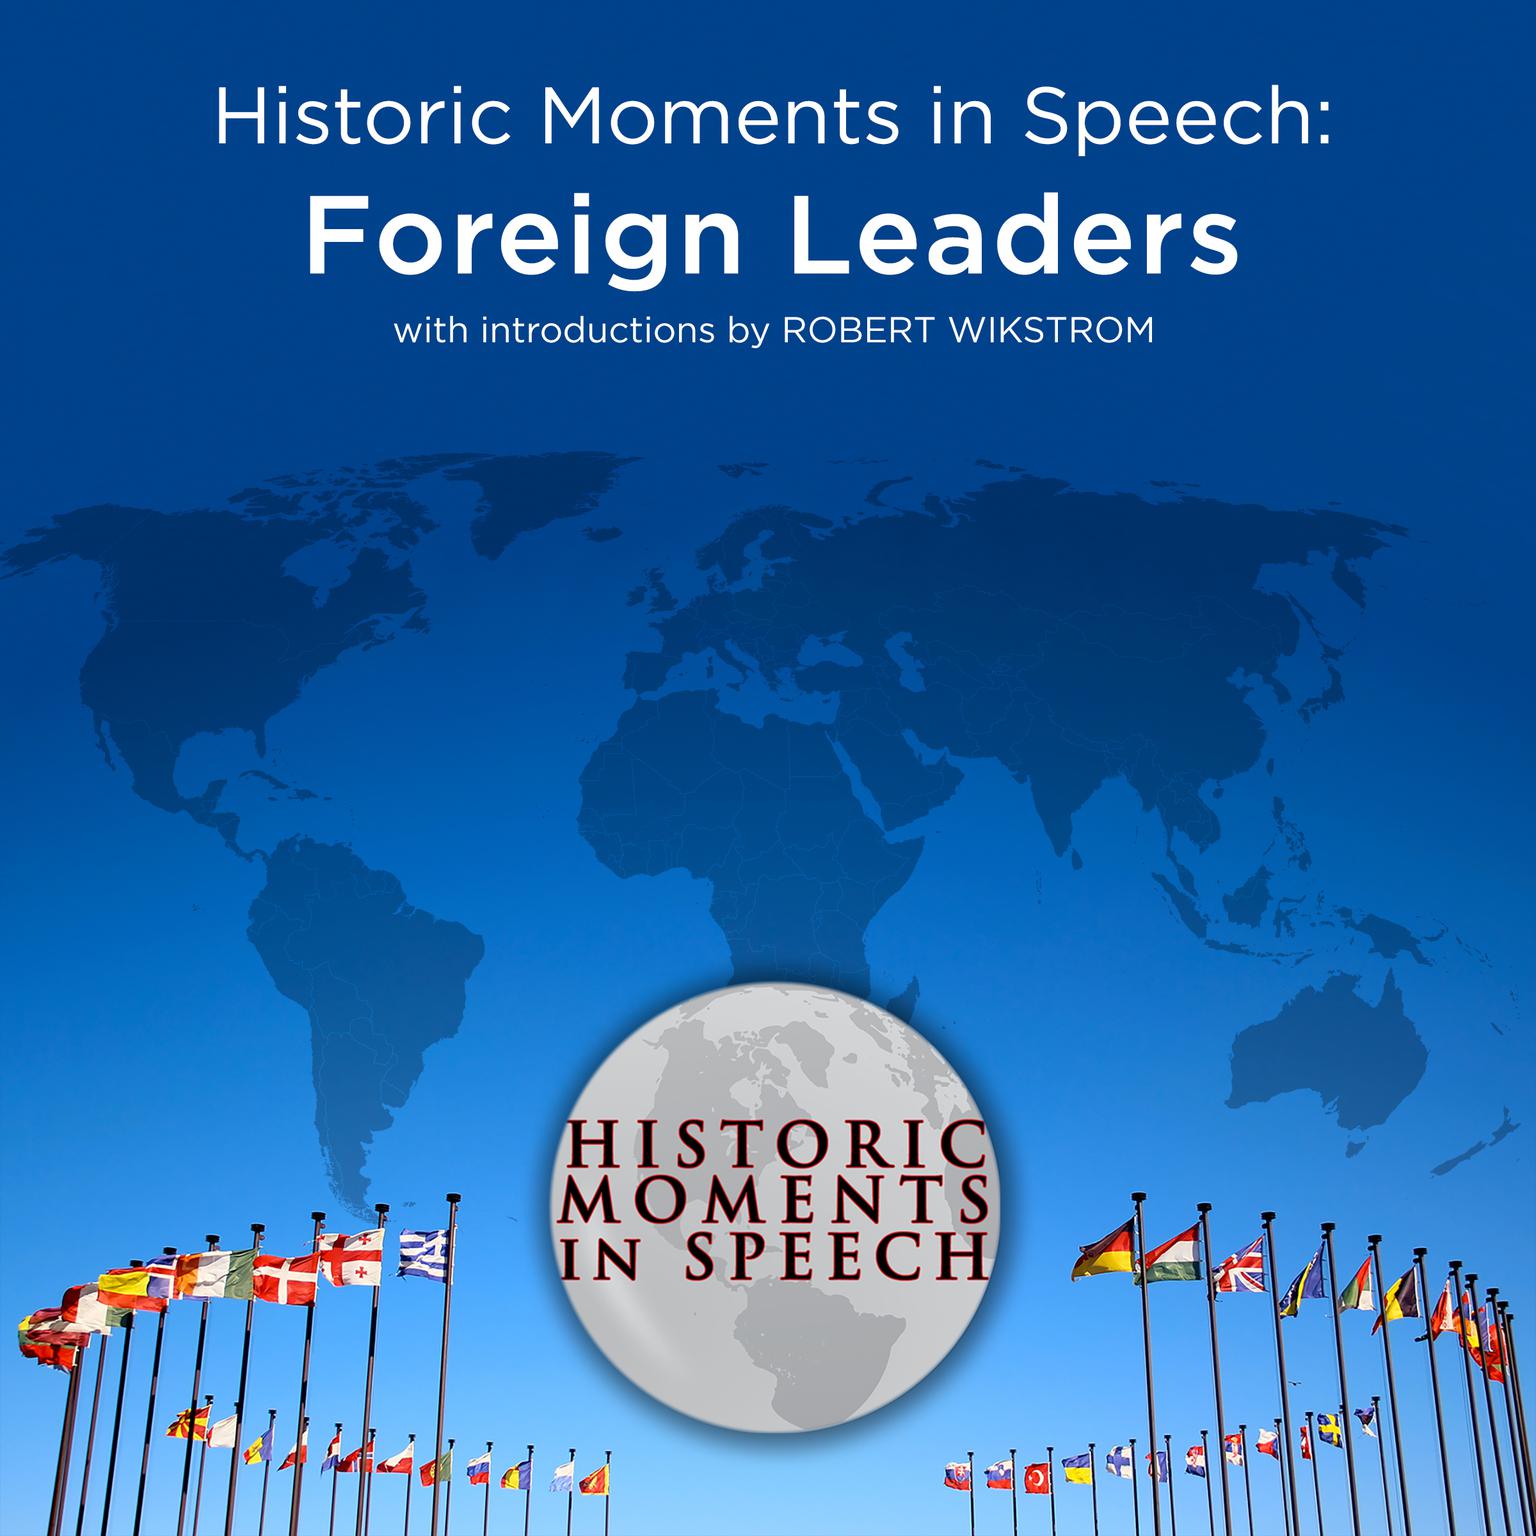 Foreign Leaders Audiobook, by the Speech Resource Company